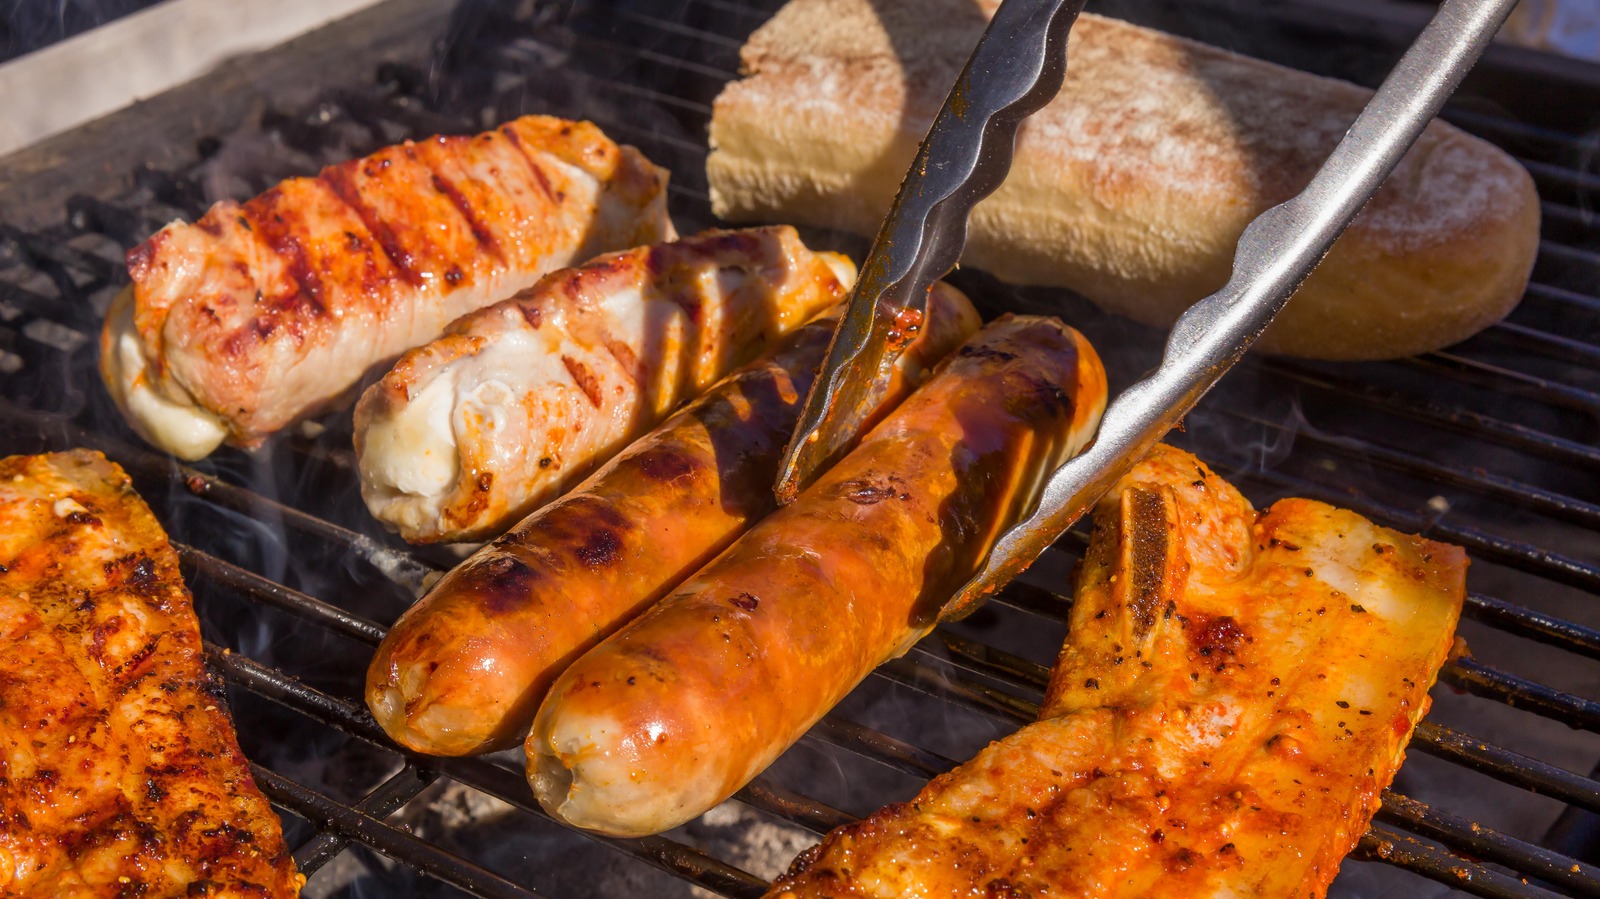 Grill Buying Guide: 6 Things to Consider Before Buying a Grill